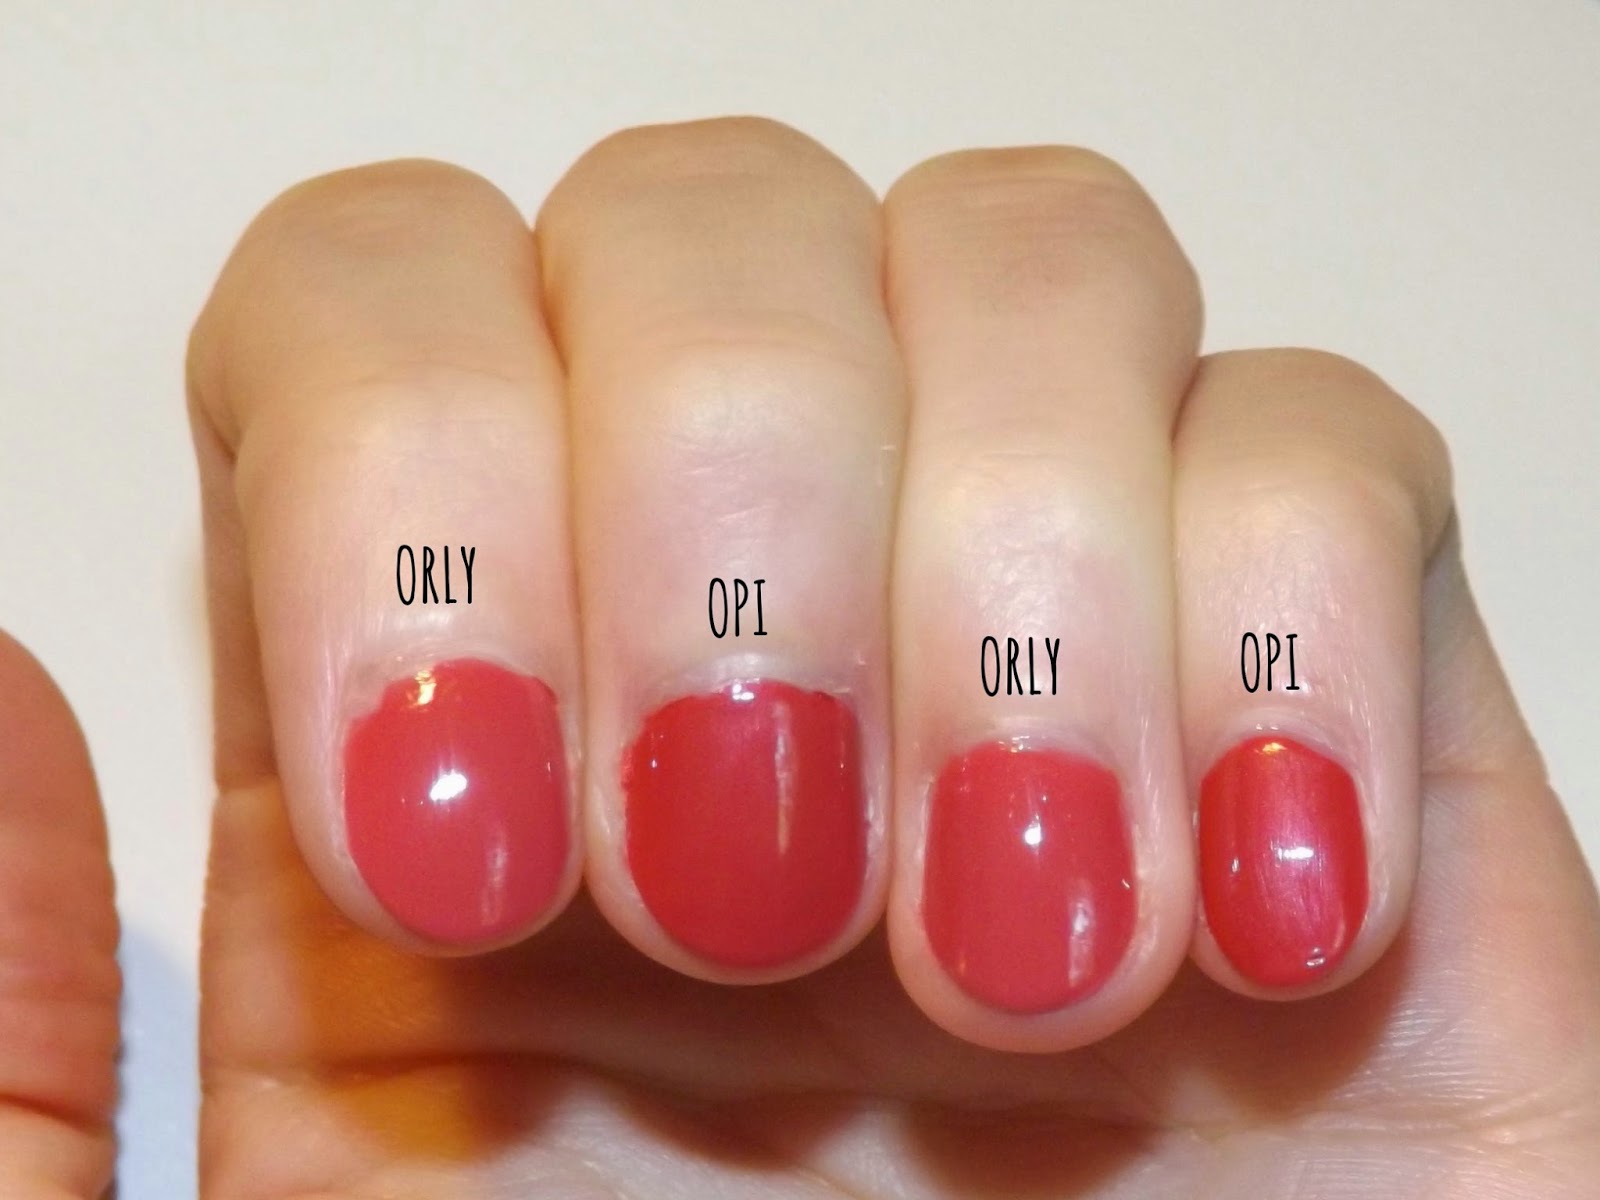 Orly Nail Lacquer in "Canyon Clay" - wide 9